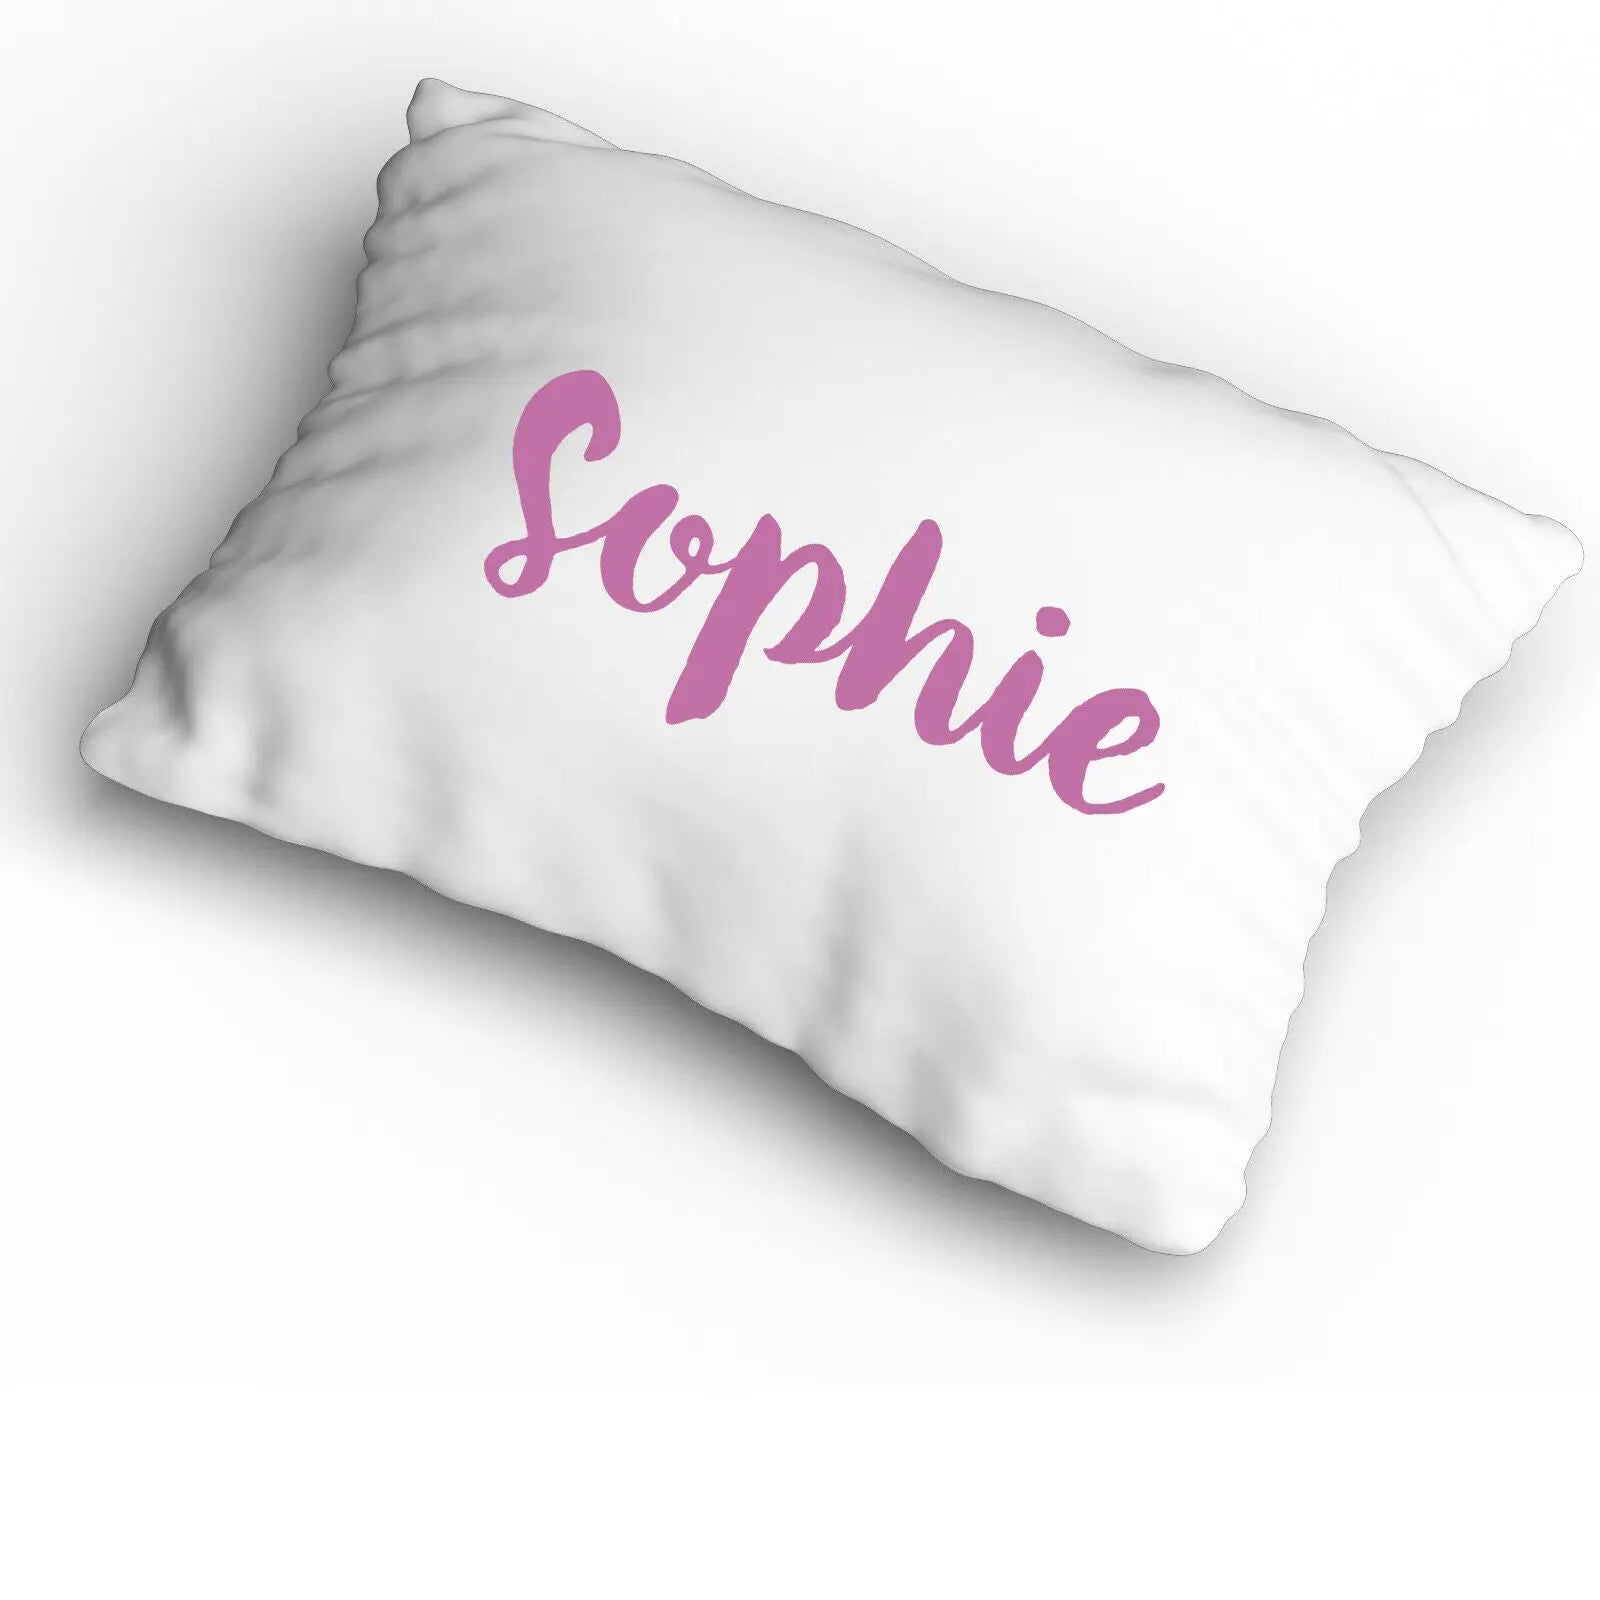 Personalised Name Cover Pillowcase Custom Gift Initials Pillow Case - Pink Cursive - CushionPop